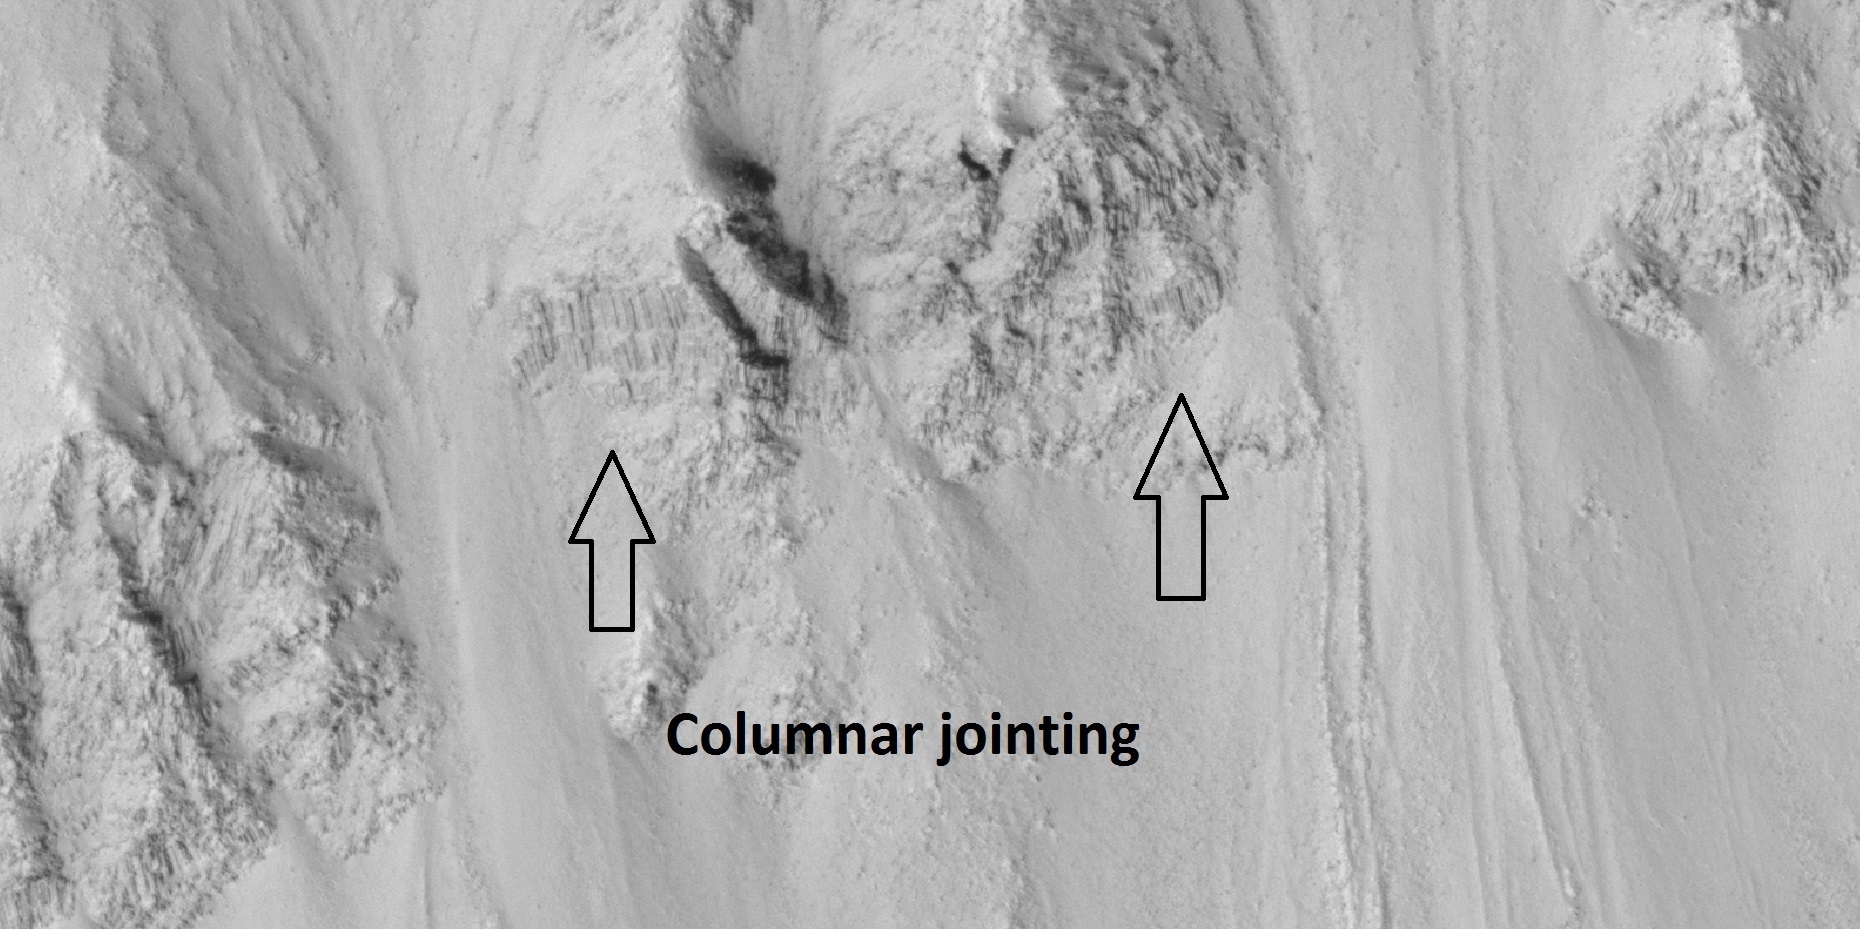 Close view of crater wall with columnar jointing labeled